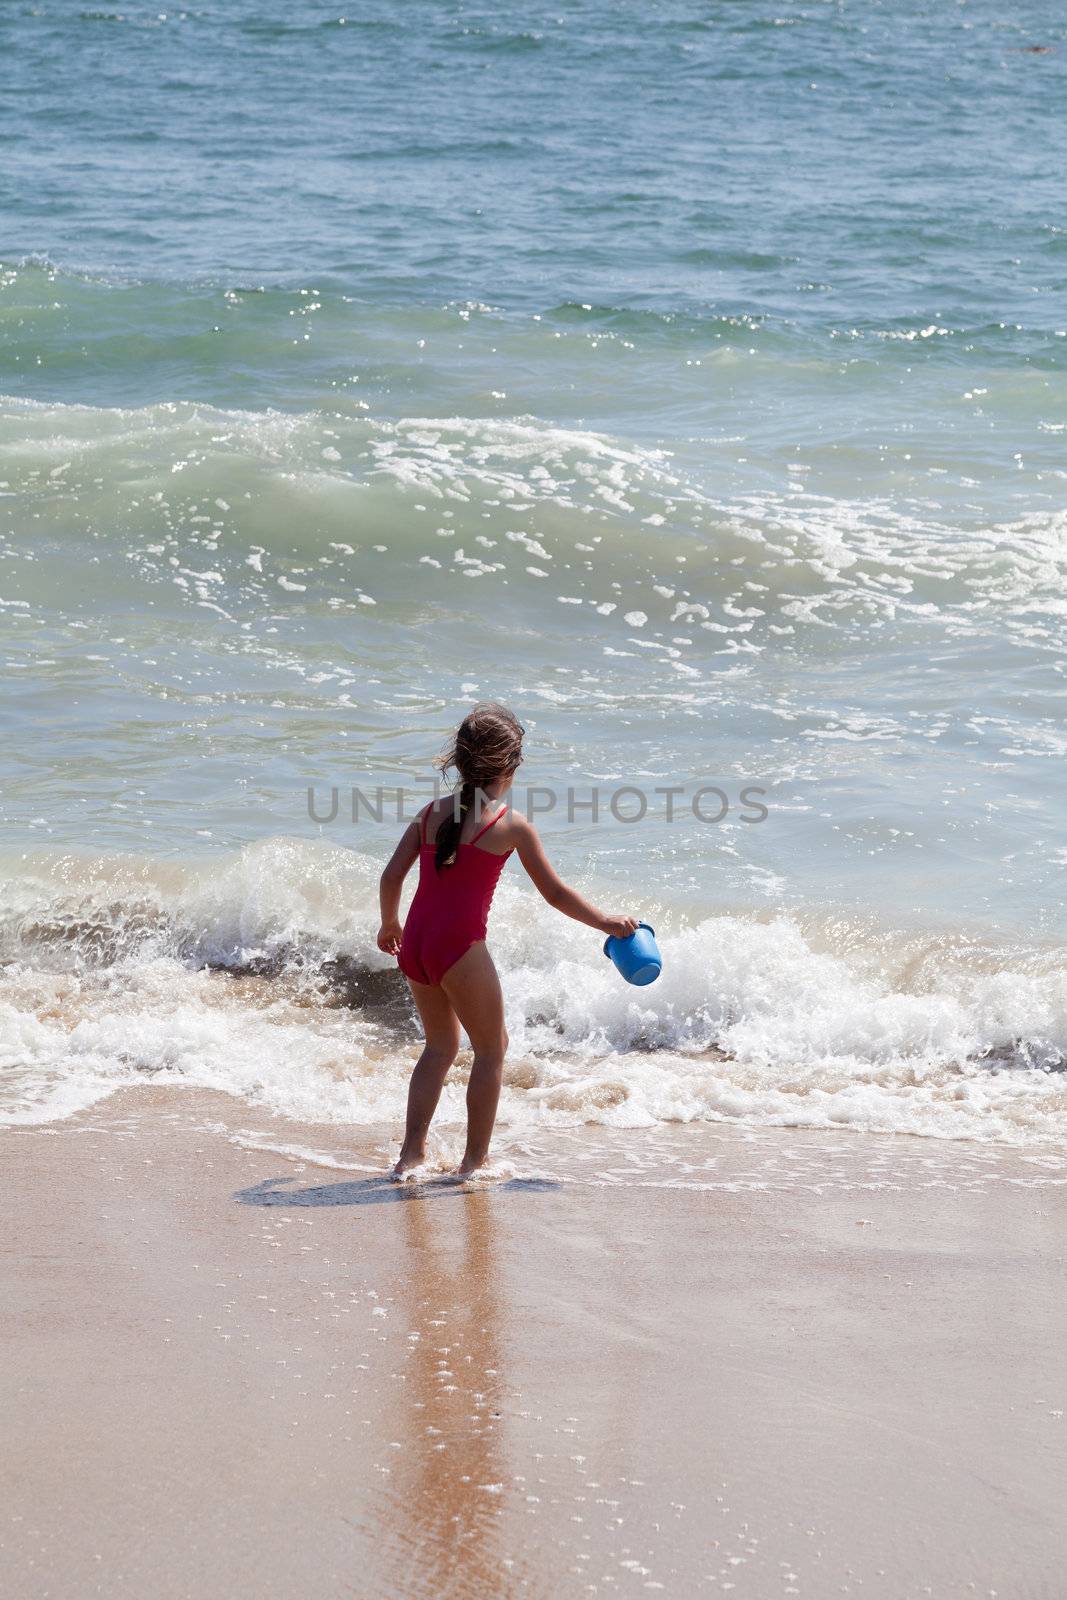 Very excited little girl running in the ocean surf with a blue bucket